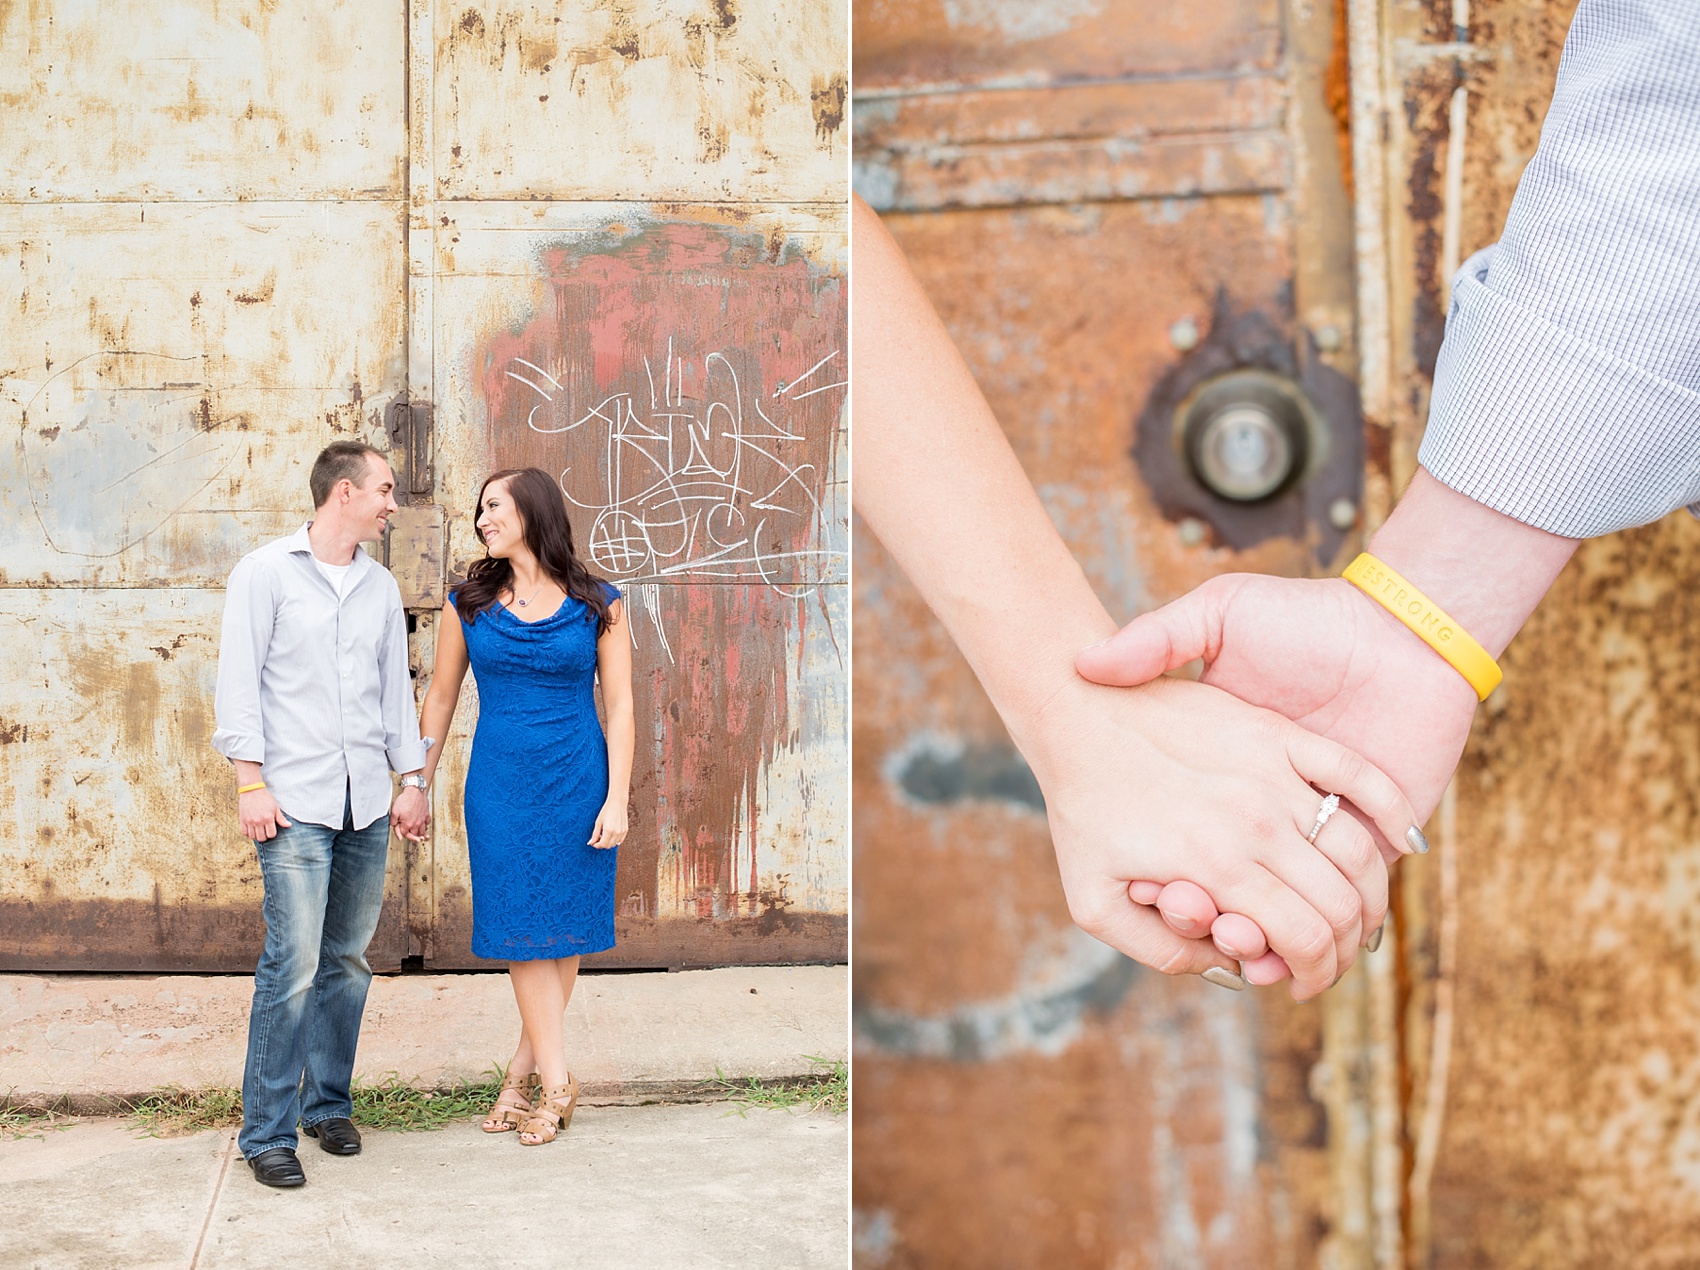 Downtown Raleigh urban industrial engagement photos by Mikkel Paige Photography.